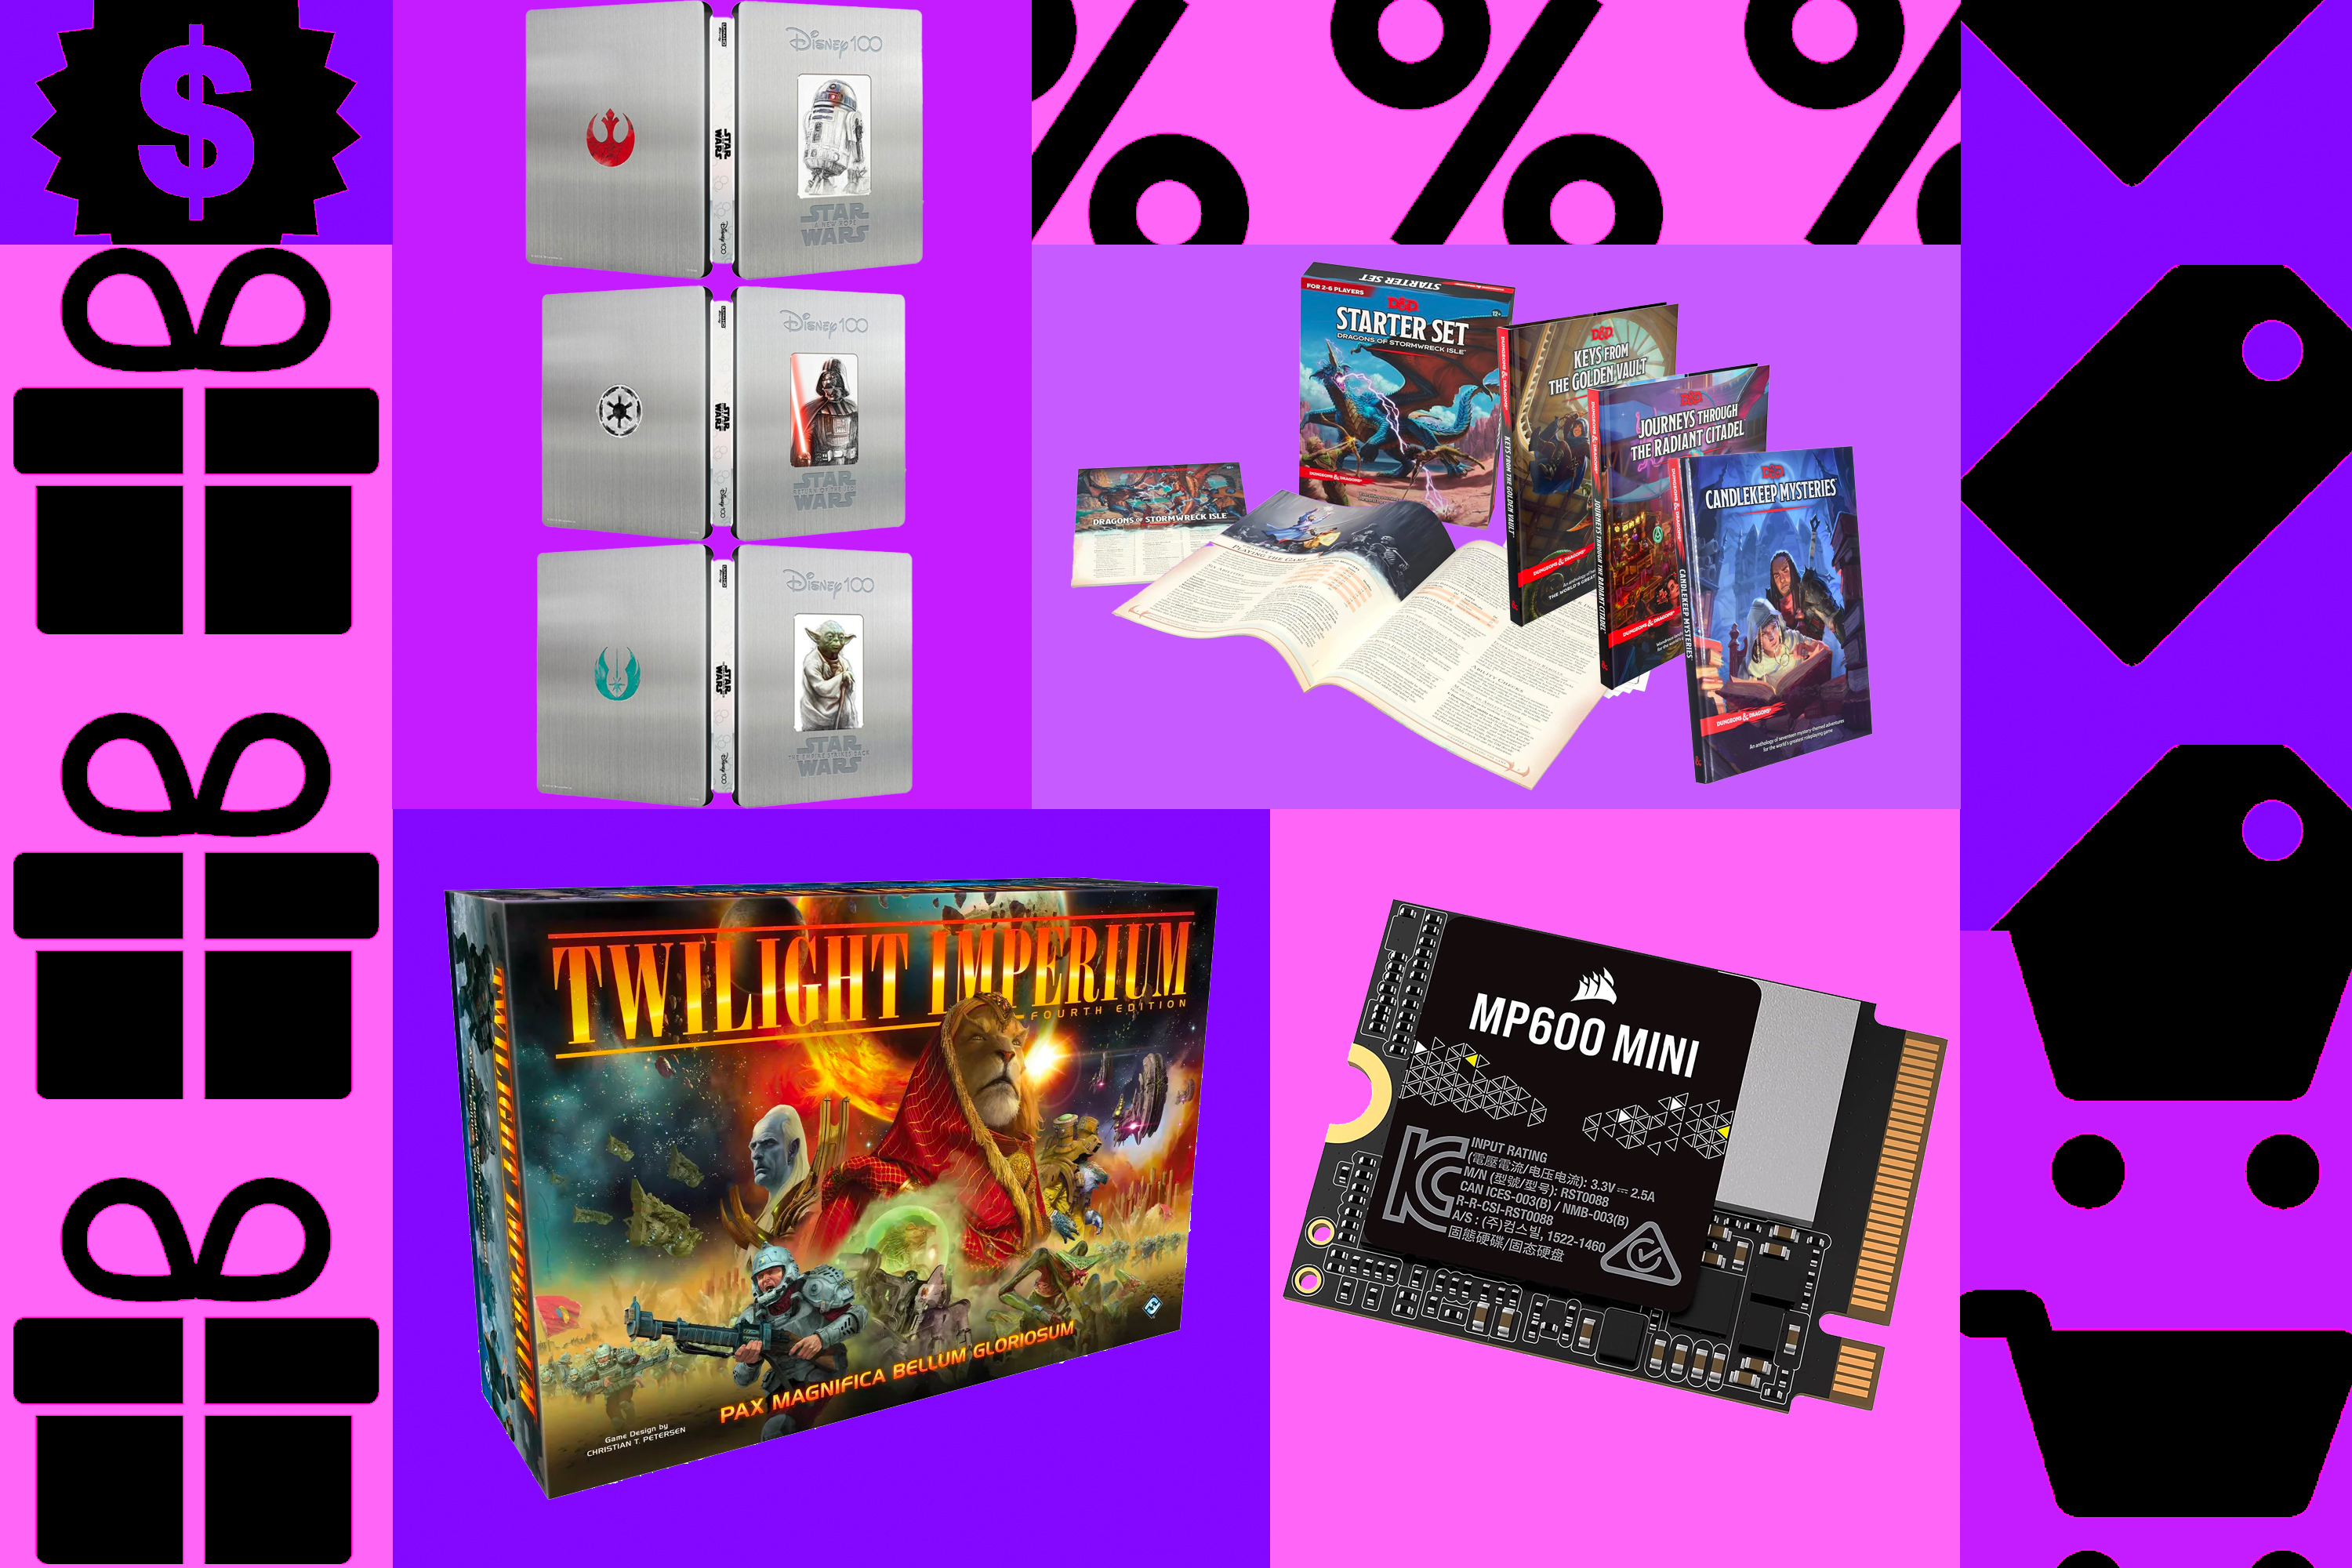 A composite image of products on sale during Cyber Monday